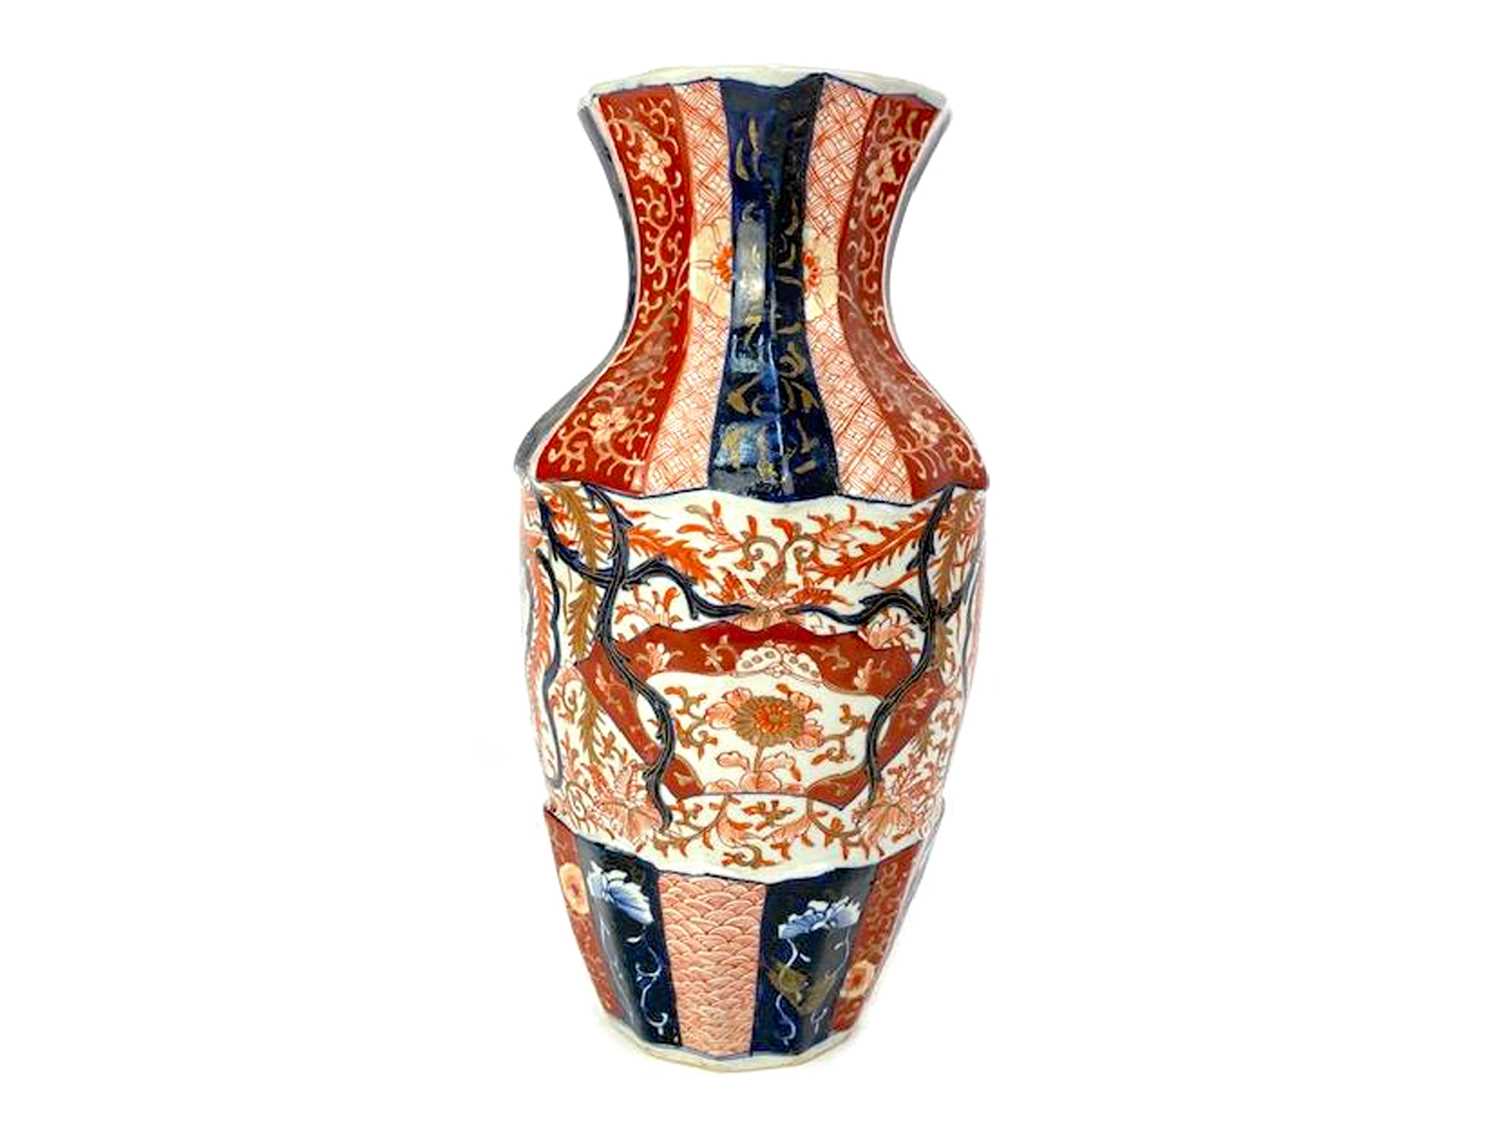 Lot 751 - AN EARLY 20TH CENTURY JAPANESE IMARI PATTERNED VASE